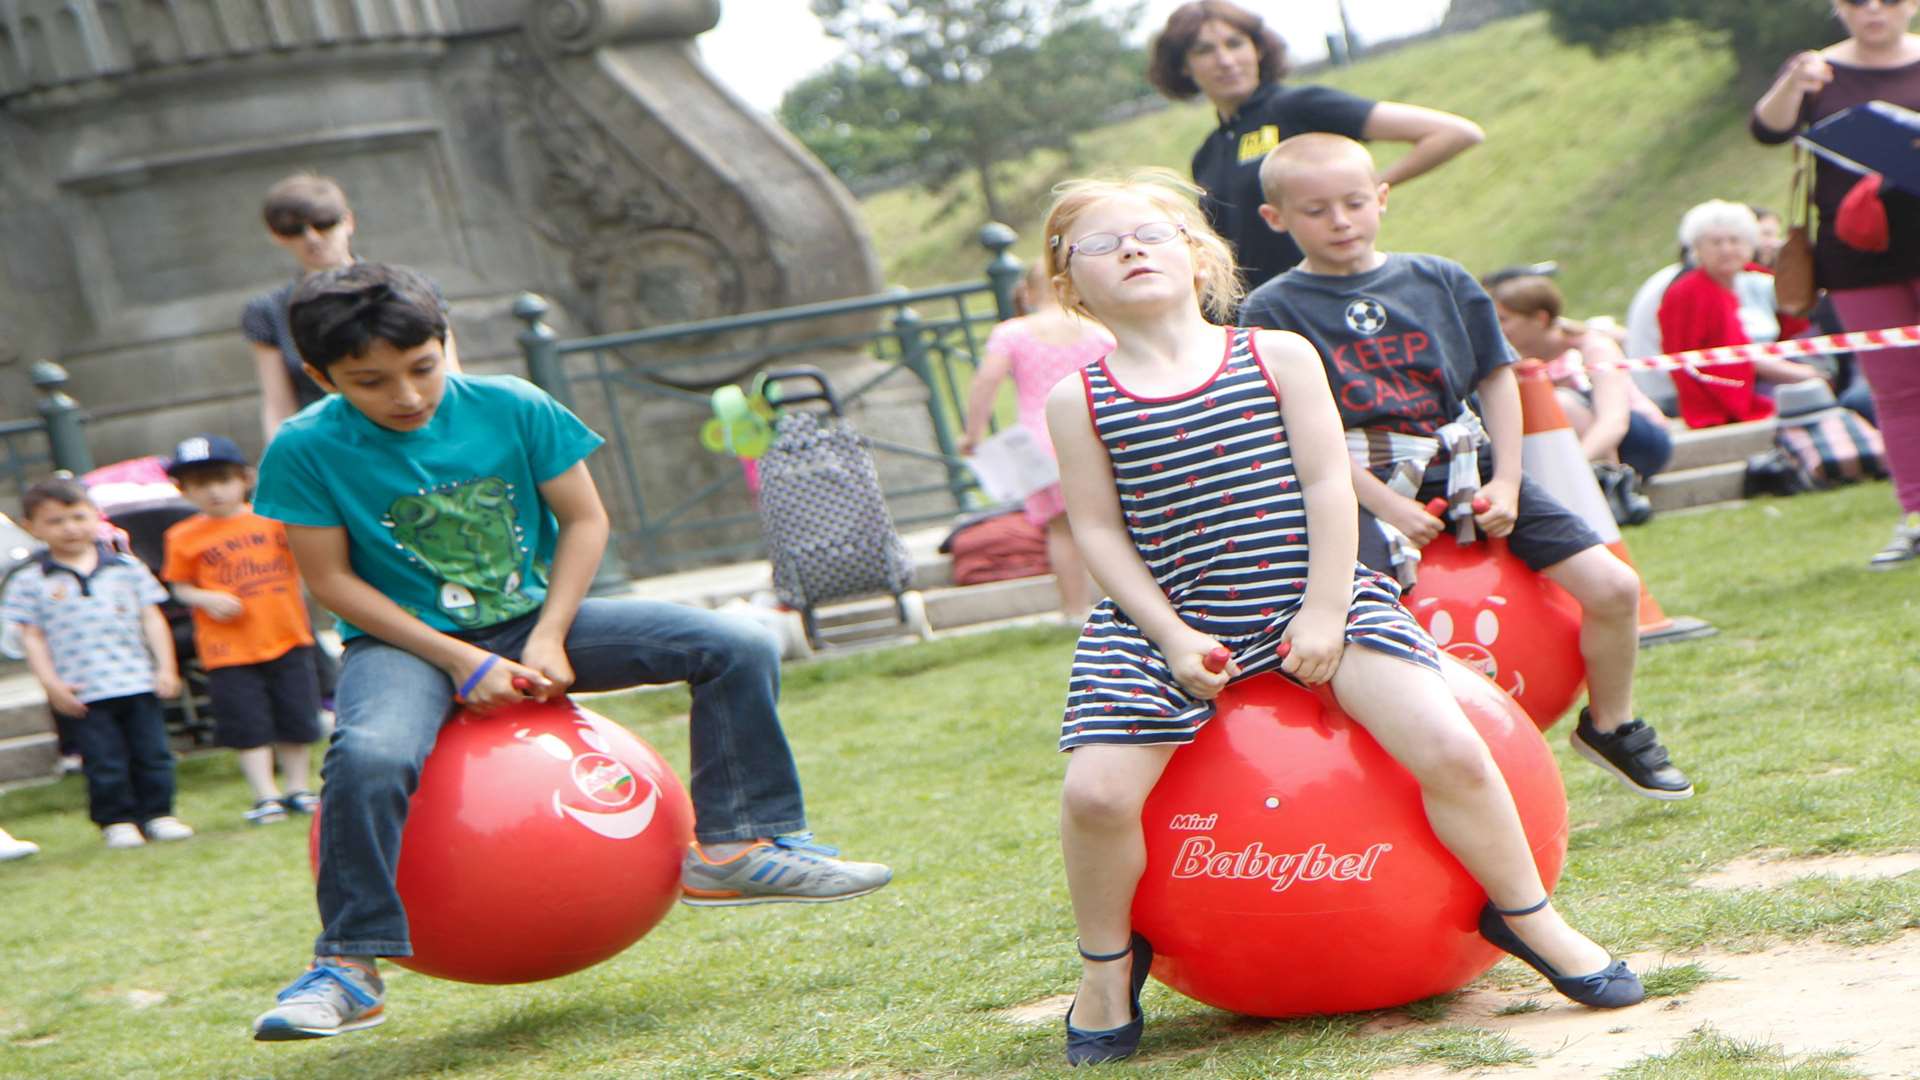 Children taking on a space hopper challenge at the 2014 Buster's Big Bash event.